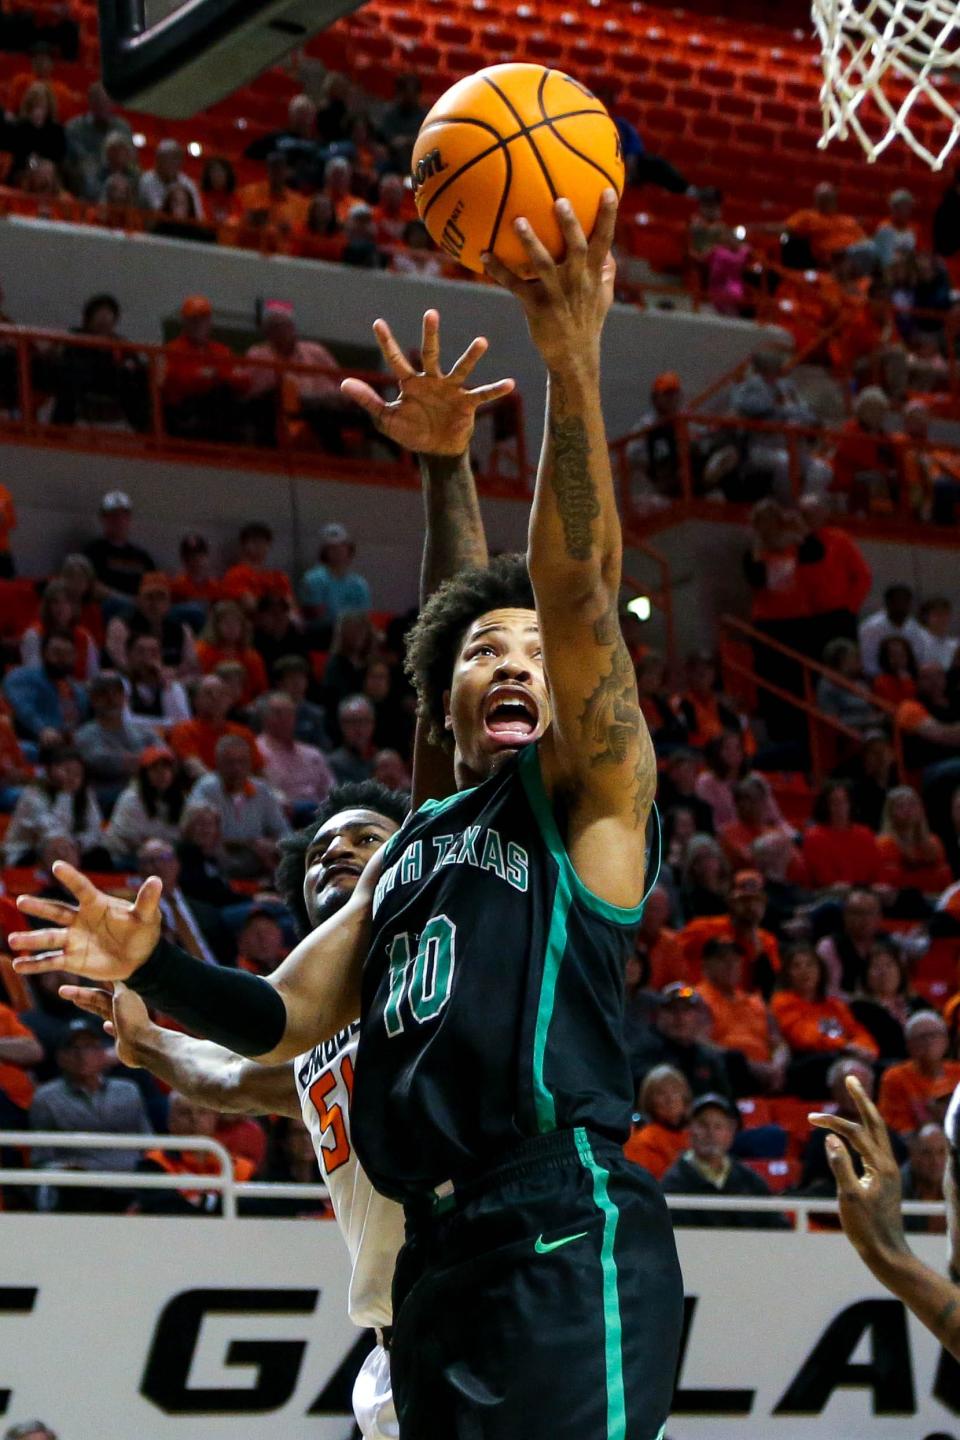 North Texas guard Kai Huntsberry (10) jumps to shoot in the second half during a college basketball game in the quarterfinals of the National Invitational Tournament between the Oklahoma State Cowboys (OSU) and the North Texas Mean Green at Gallagher-Iba Arena in Stillwater, Okla., Tuesday, March 21, 2023.